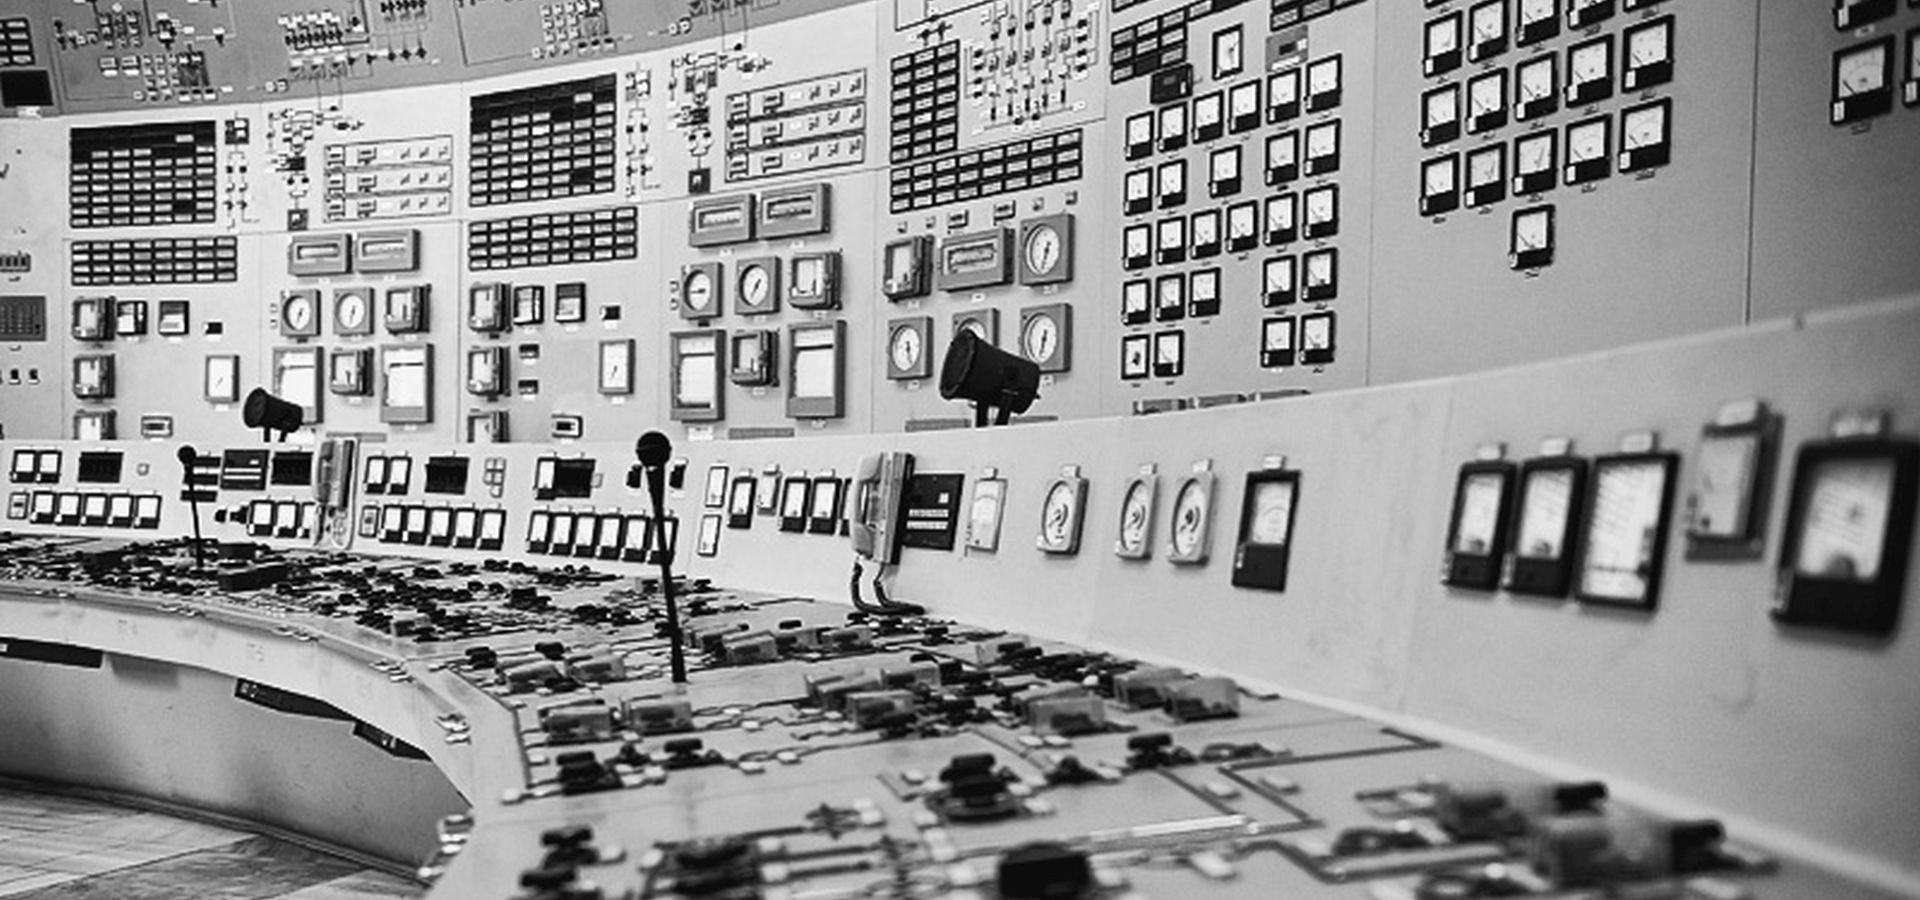 Control board of a nuclear power plant 